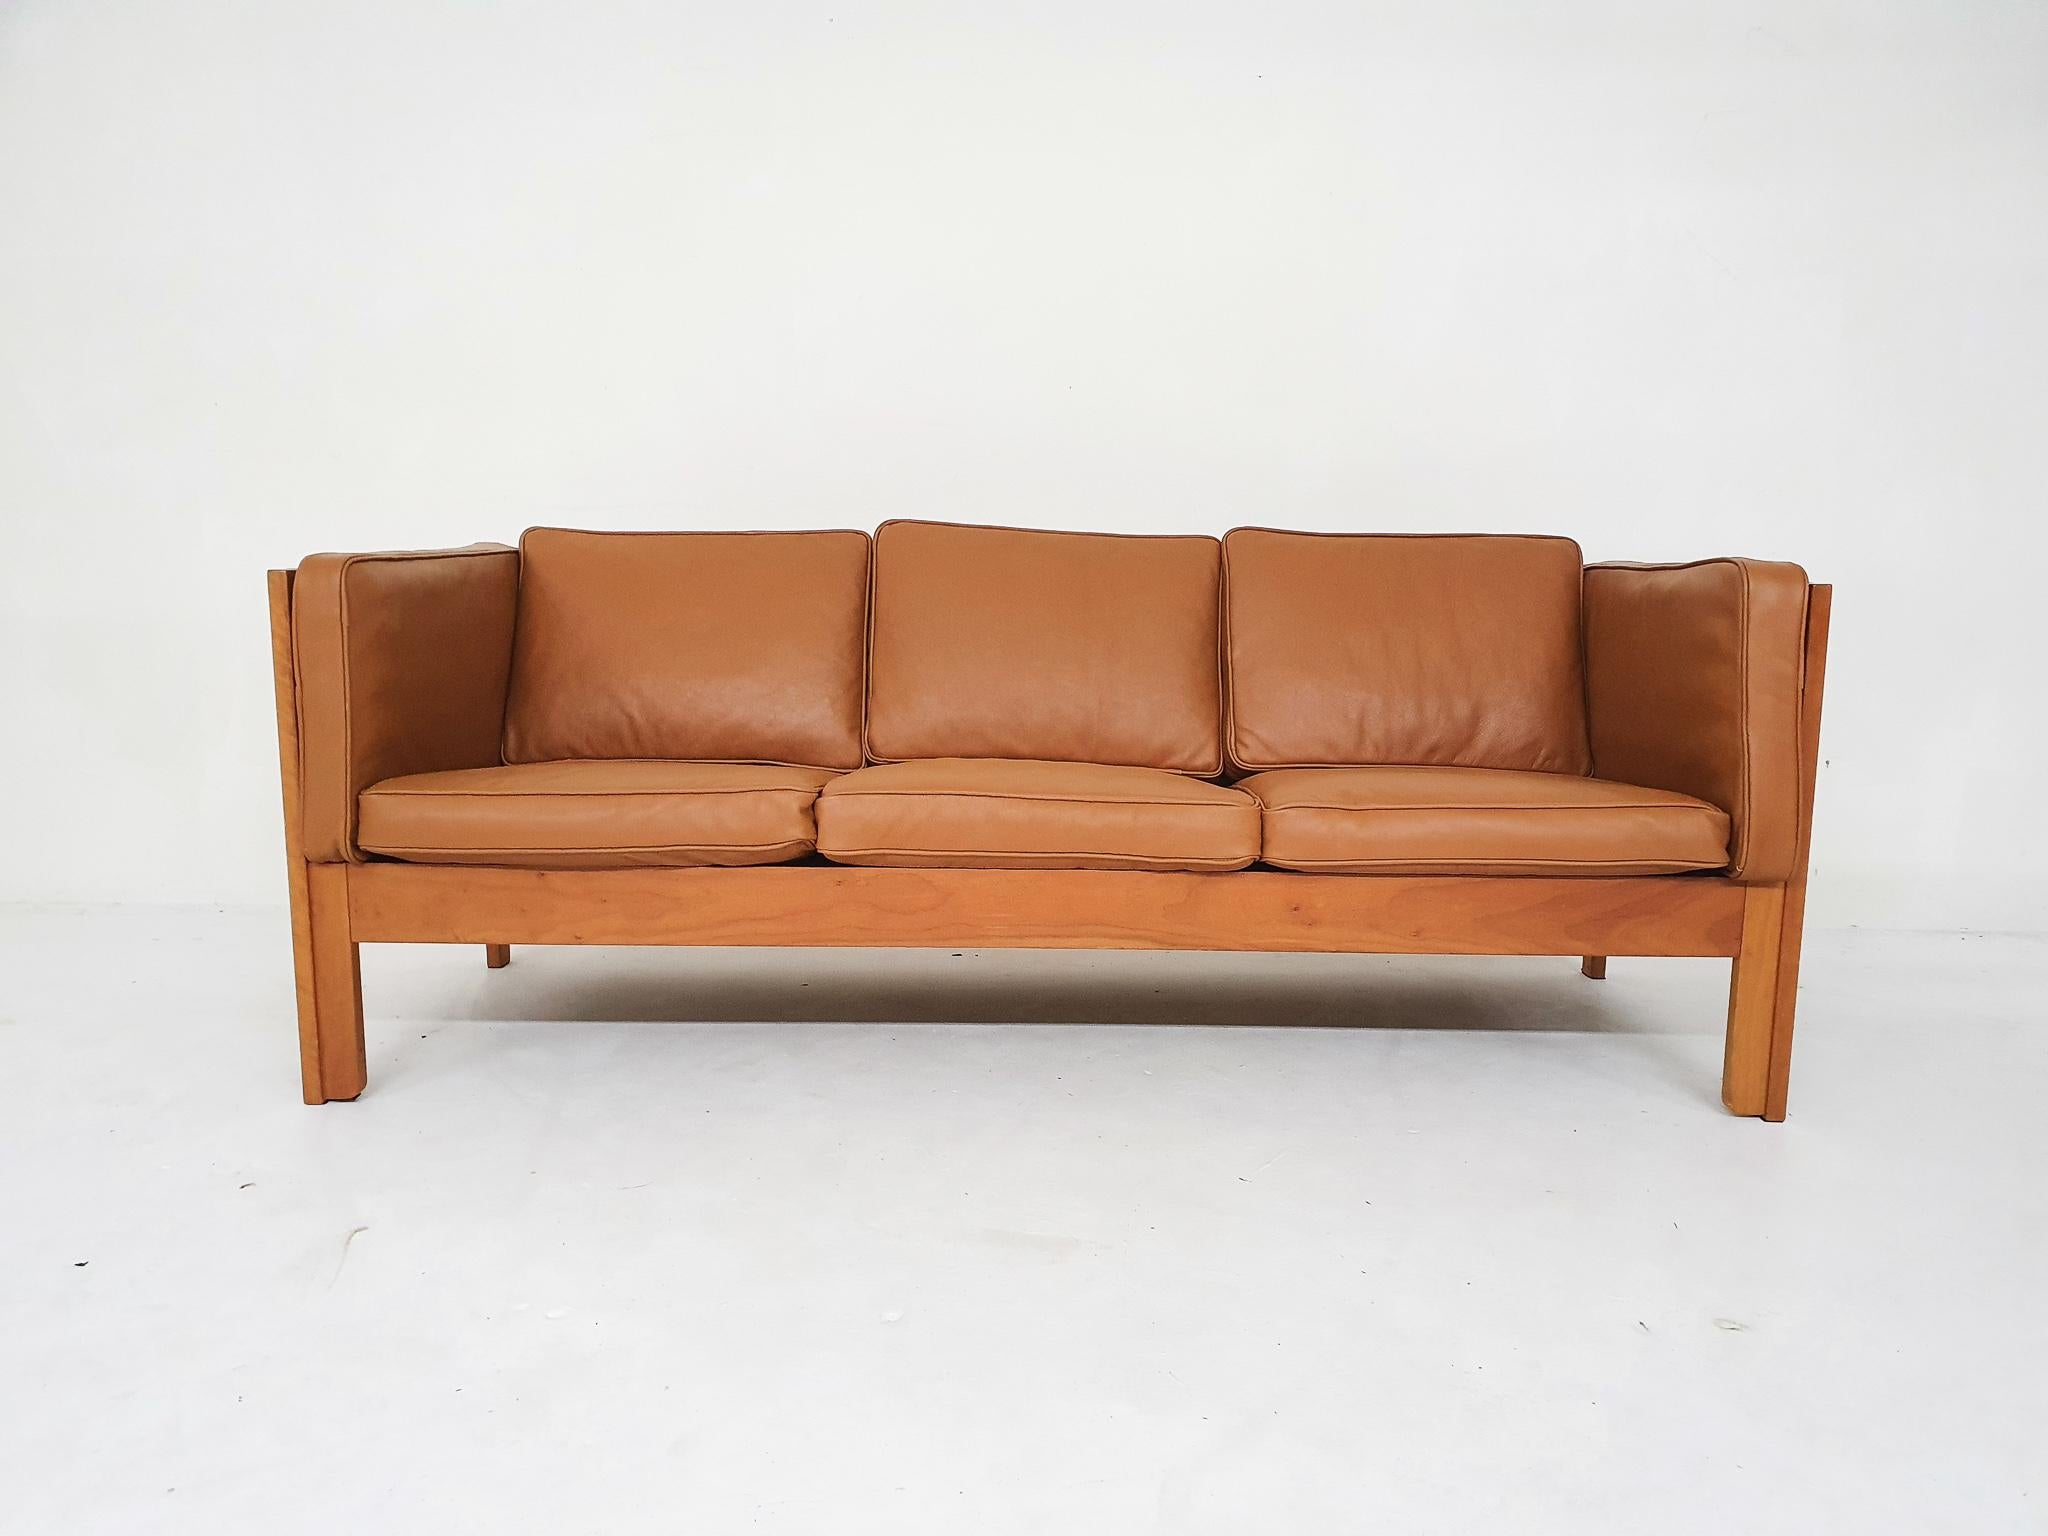 Wooden sofa with cognac leather cushions. Designed by Borge Mogensen for Fredericia.
With new cognac leather upholstery. The wooden frame is in good condition, only a sratch on the back.
The sofa is marked inside the cushions.